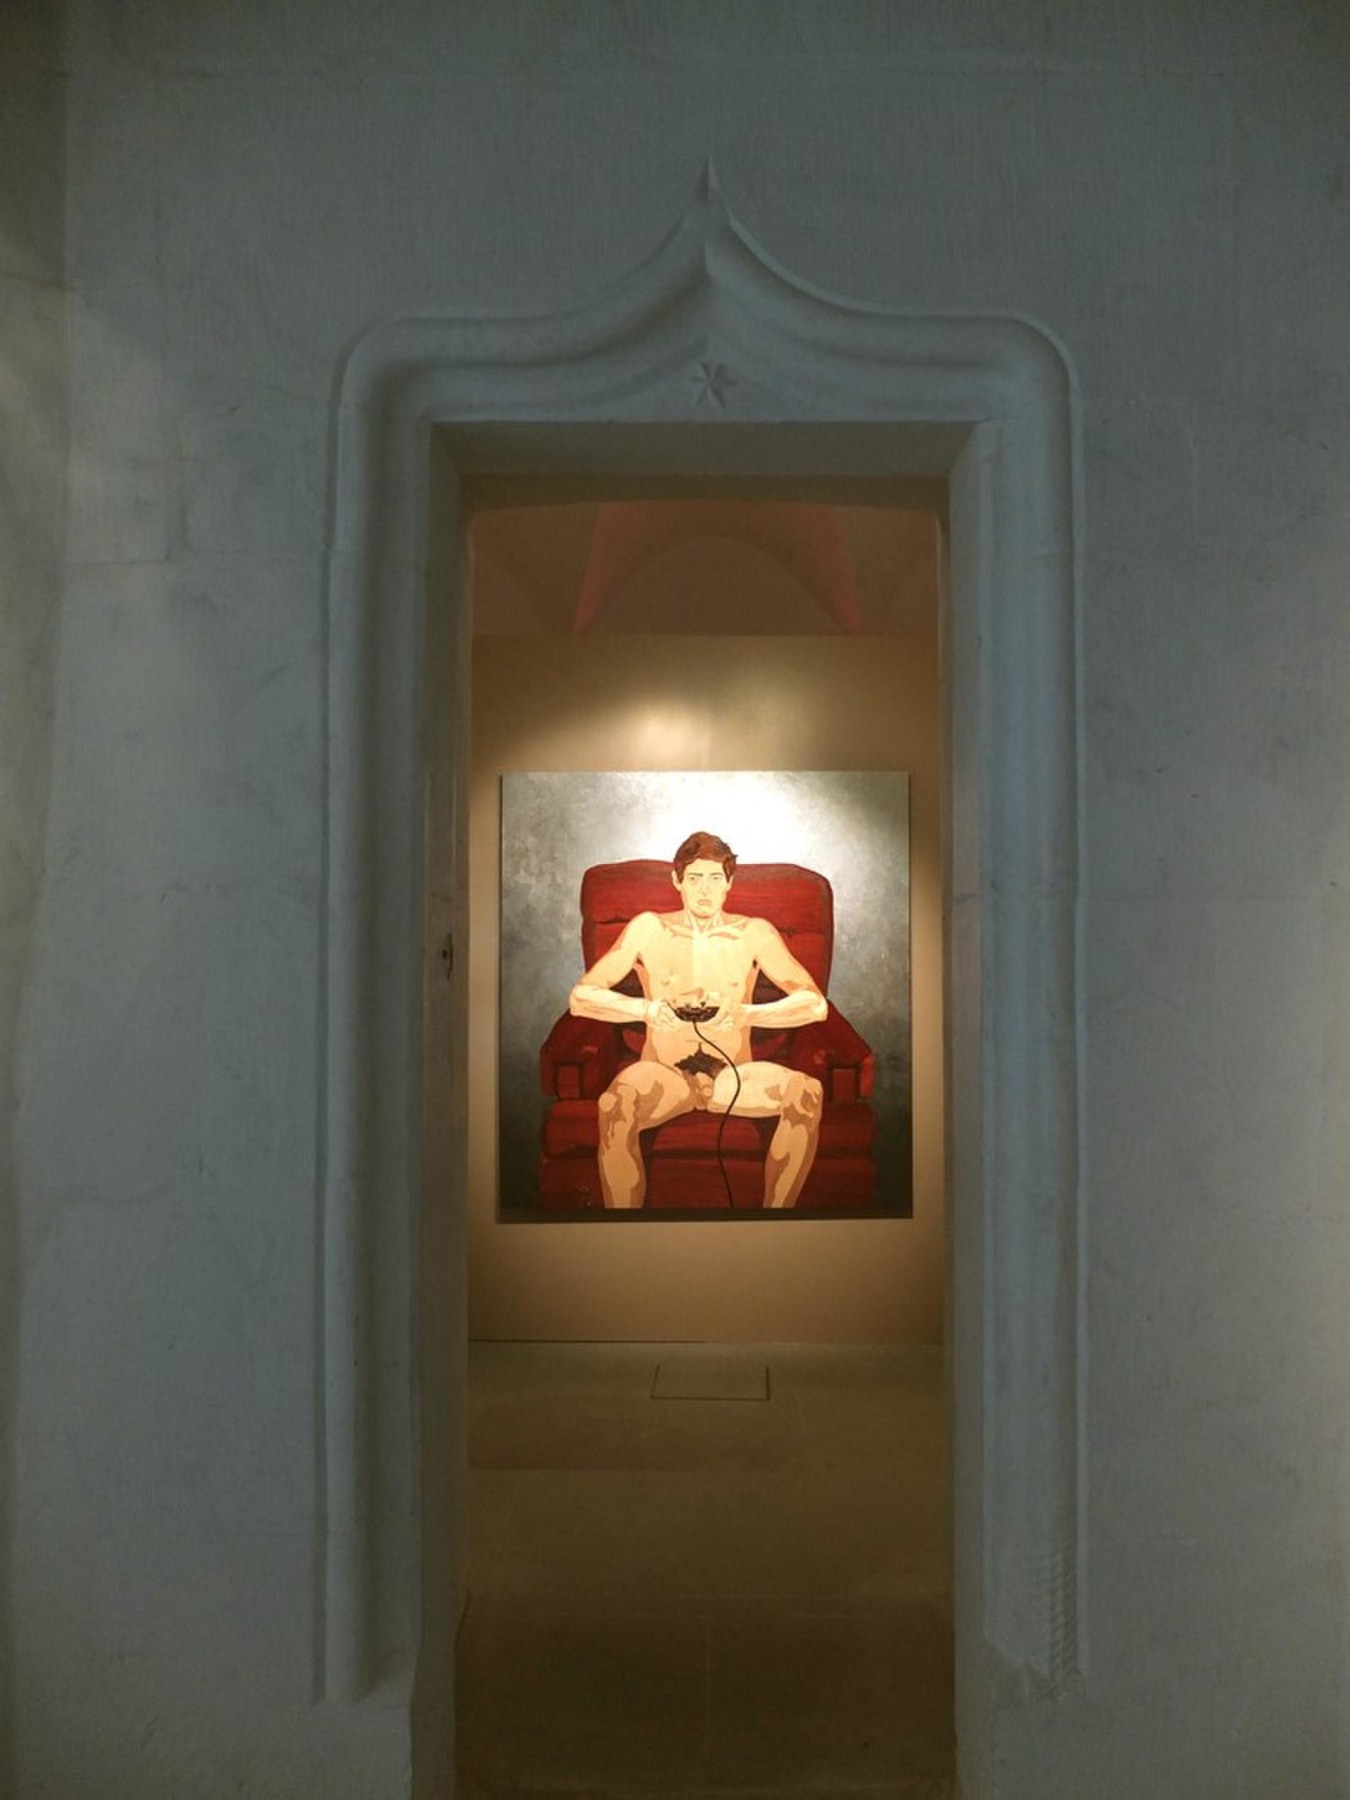 doorway revealing an artwork depicting a nude man sitting a red sofa chair